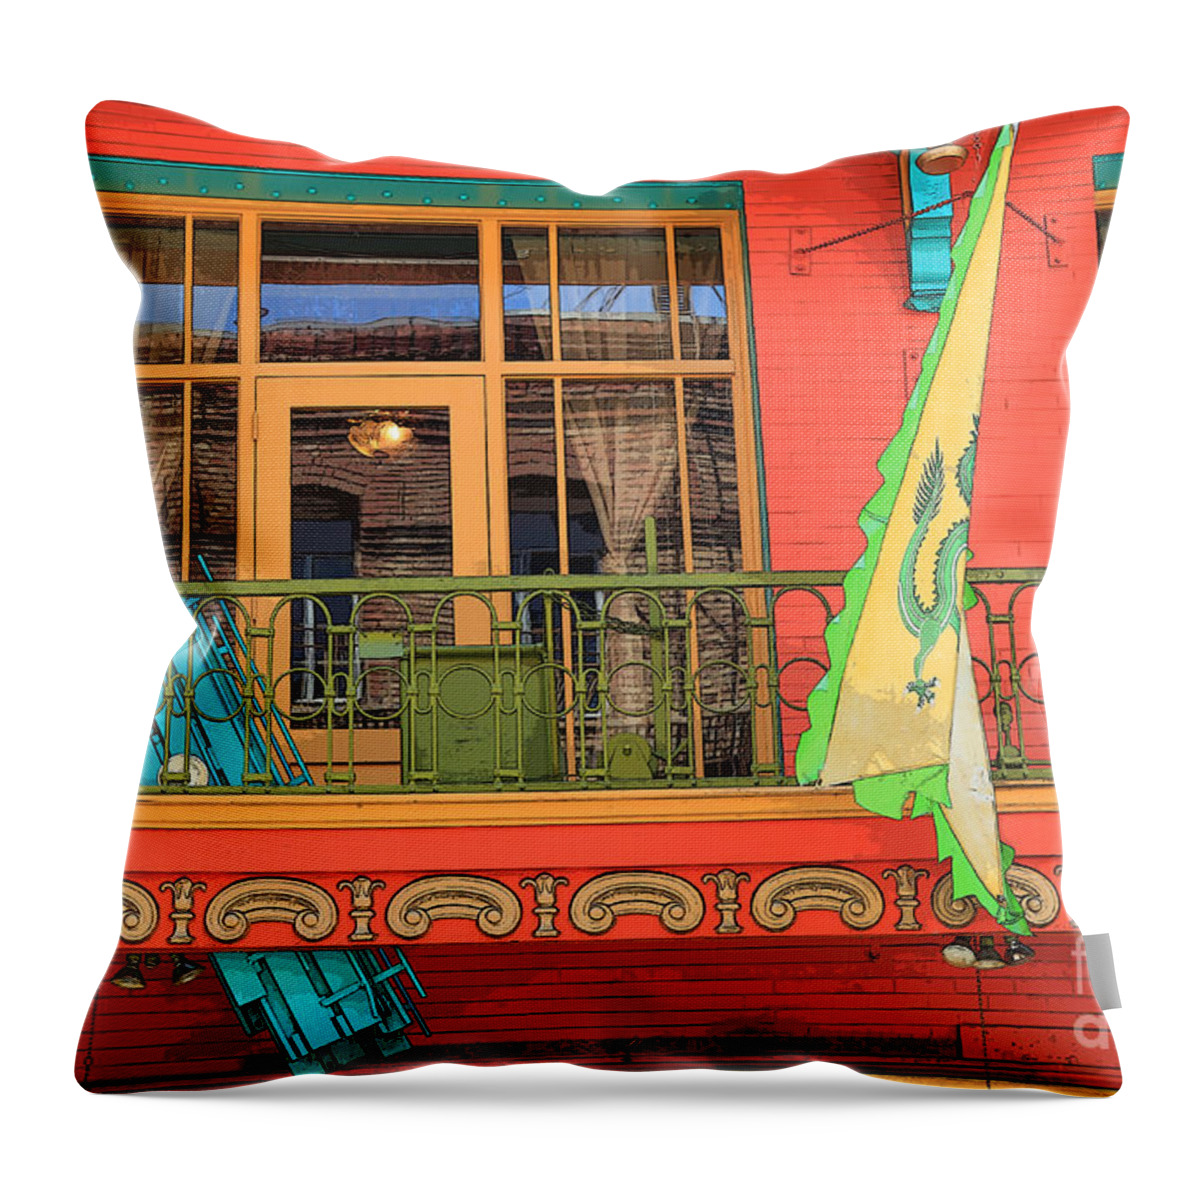 Red Throw Pillow featuring the photograph Chinatown Balcony by Jeanette French